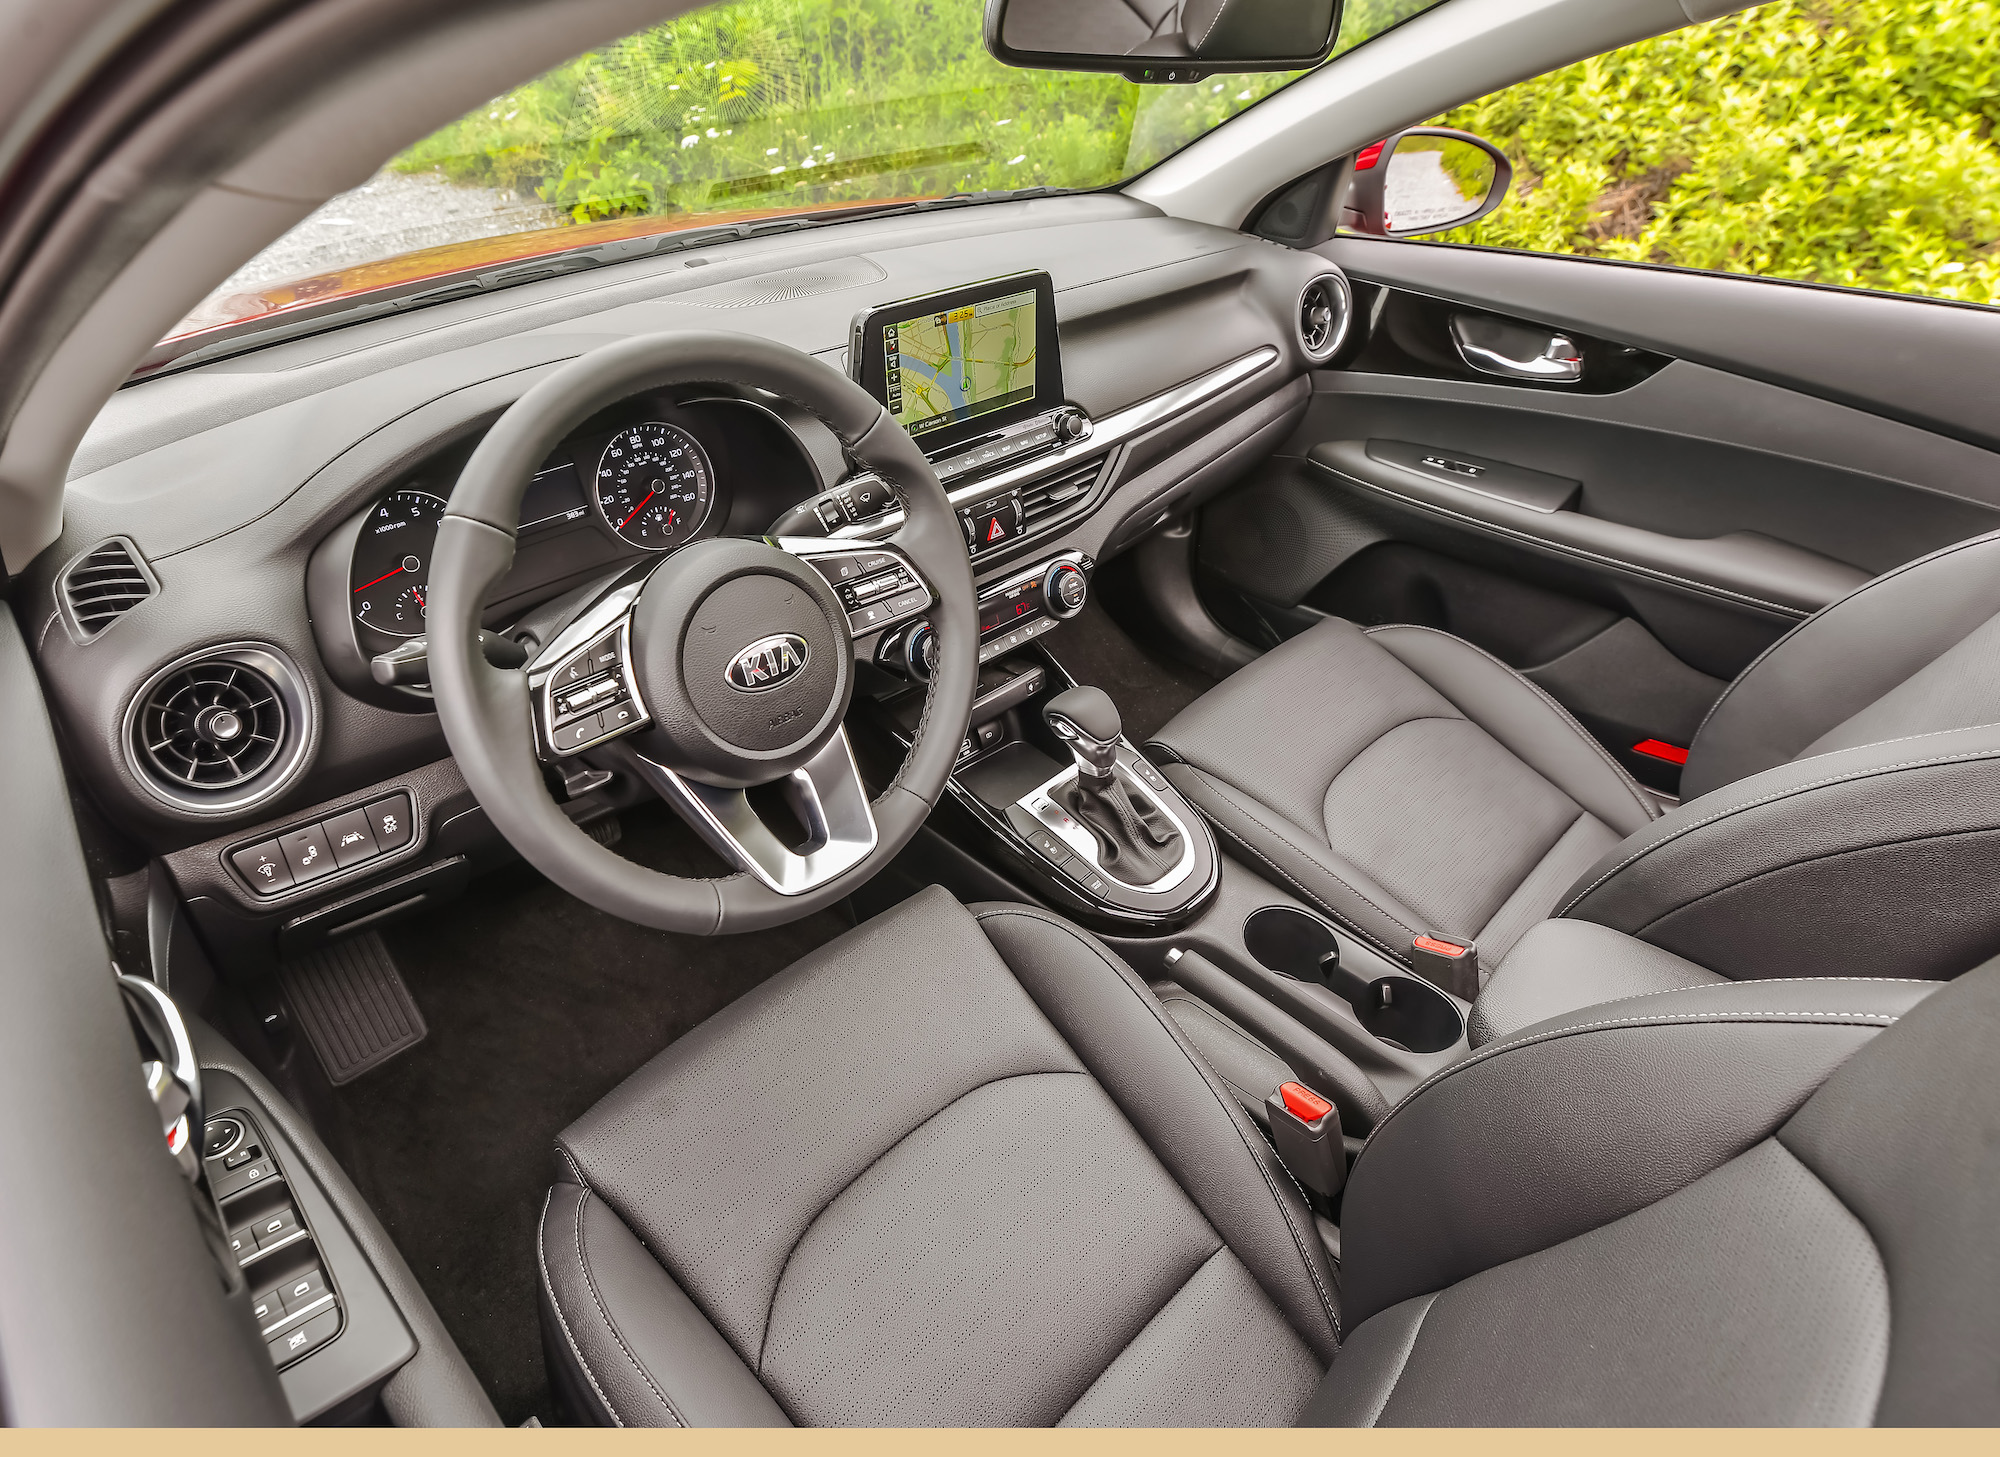 The gray front seats, steering wheel, and dashboard of a 2021 Kia Forte compact sedan